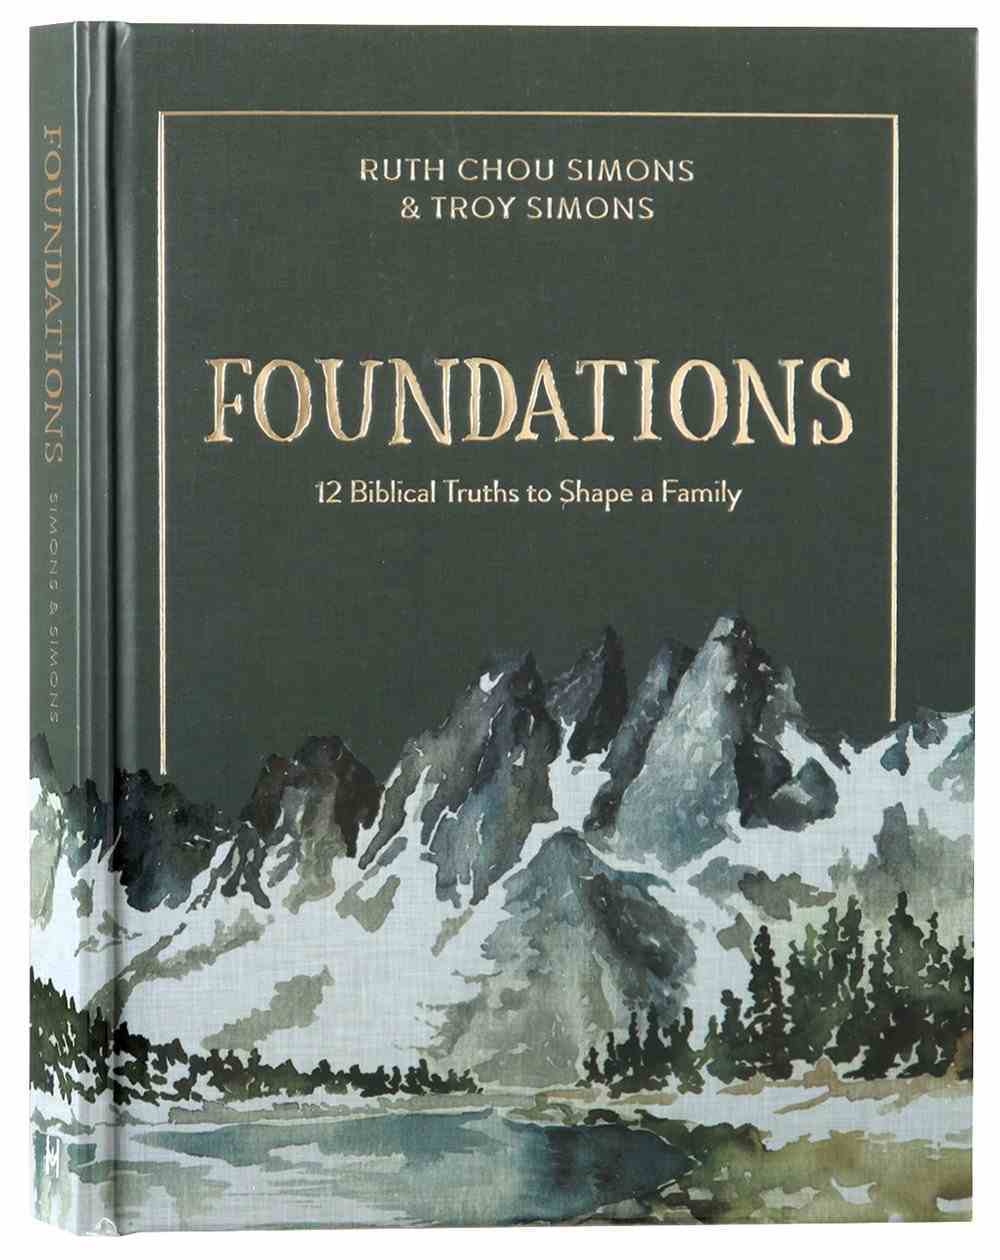 Foundations - 12 biblical truths to shape a family